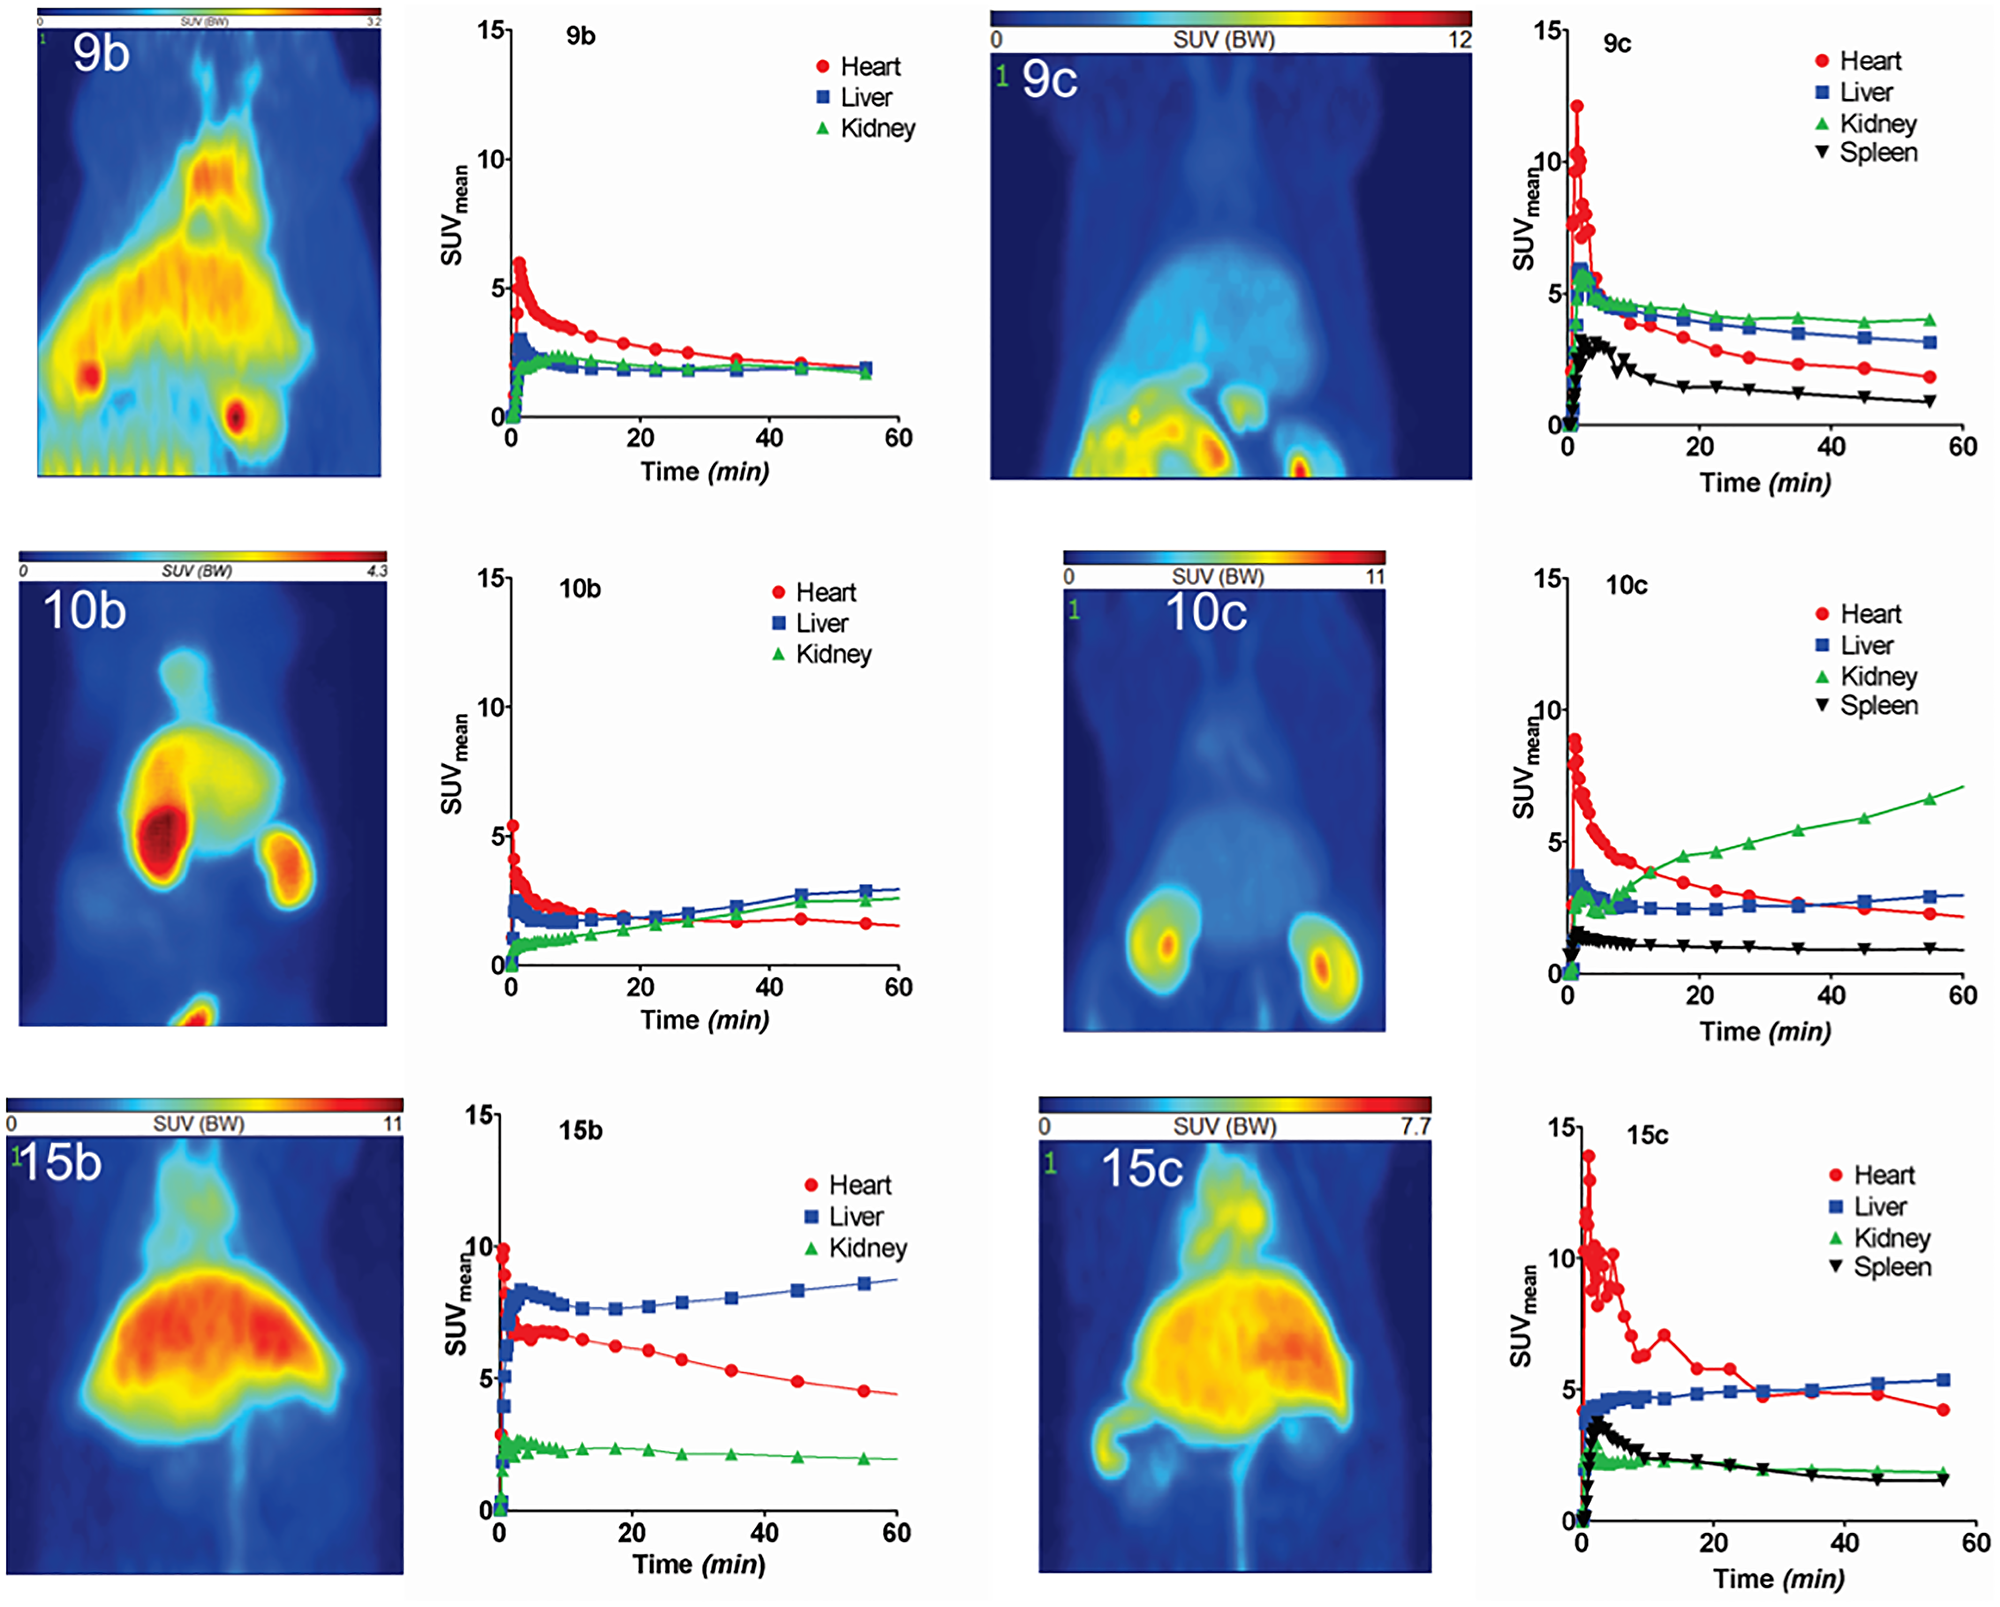 PET studies of 68Ga- and 64Cu-labeled radiotracers in healthy rats.